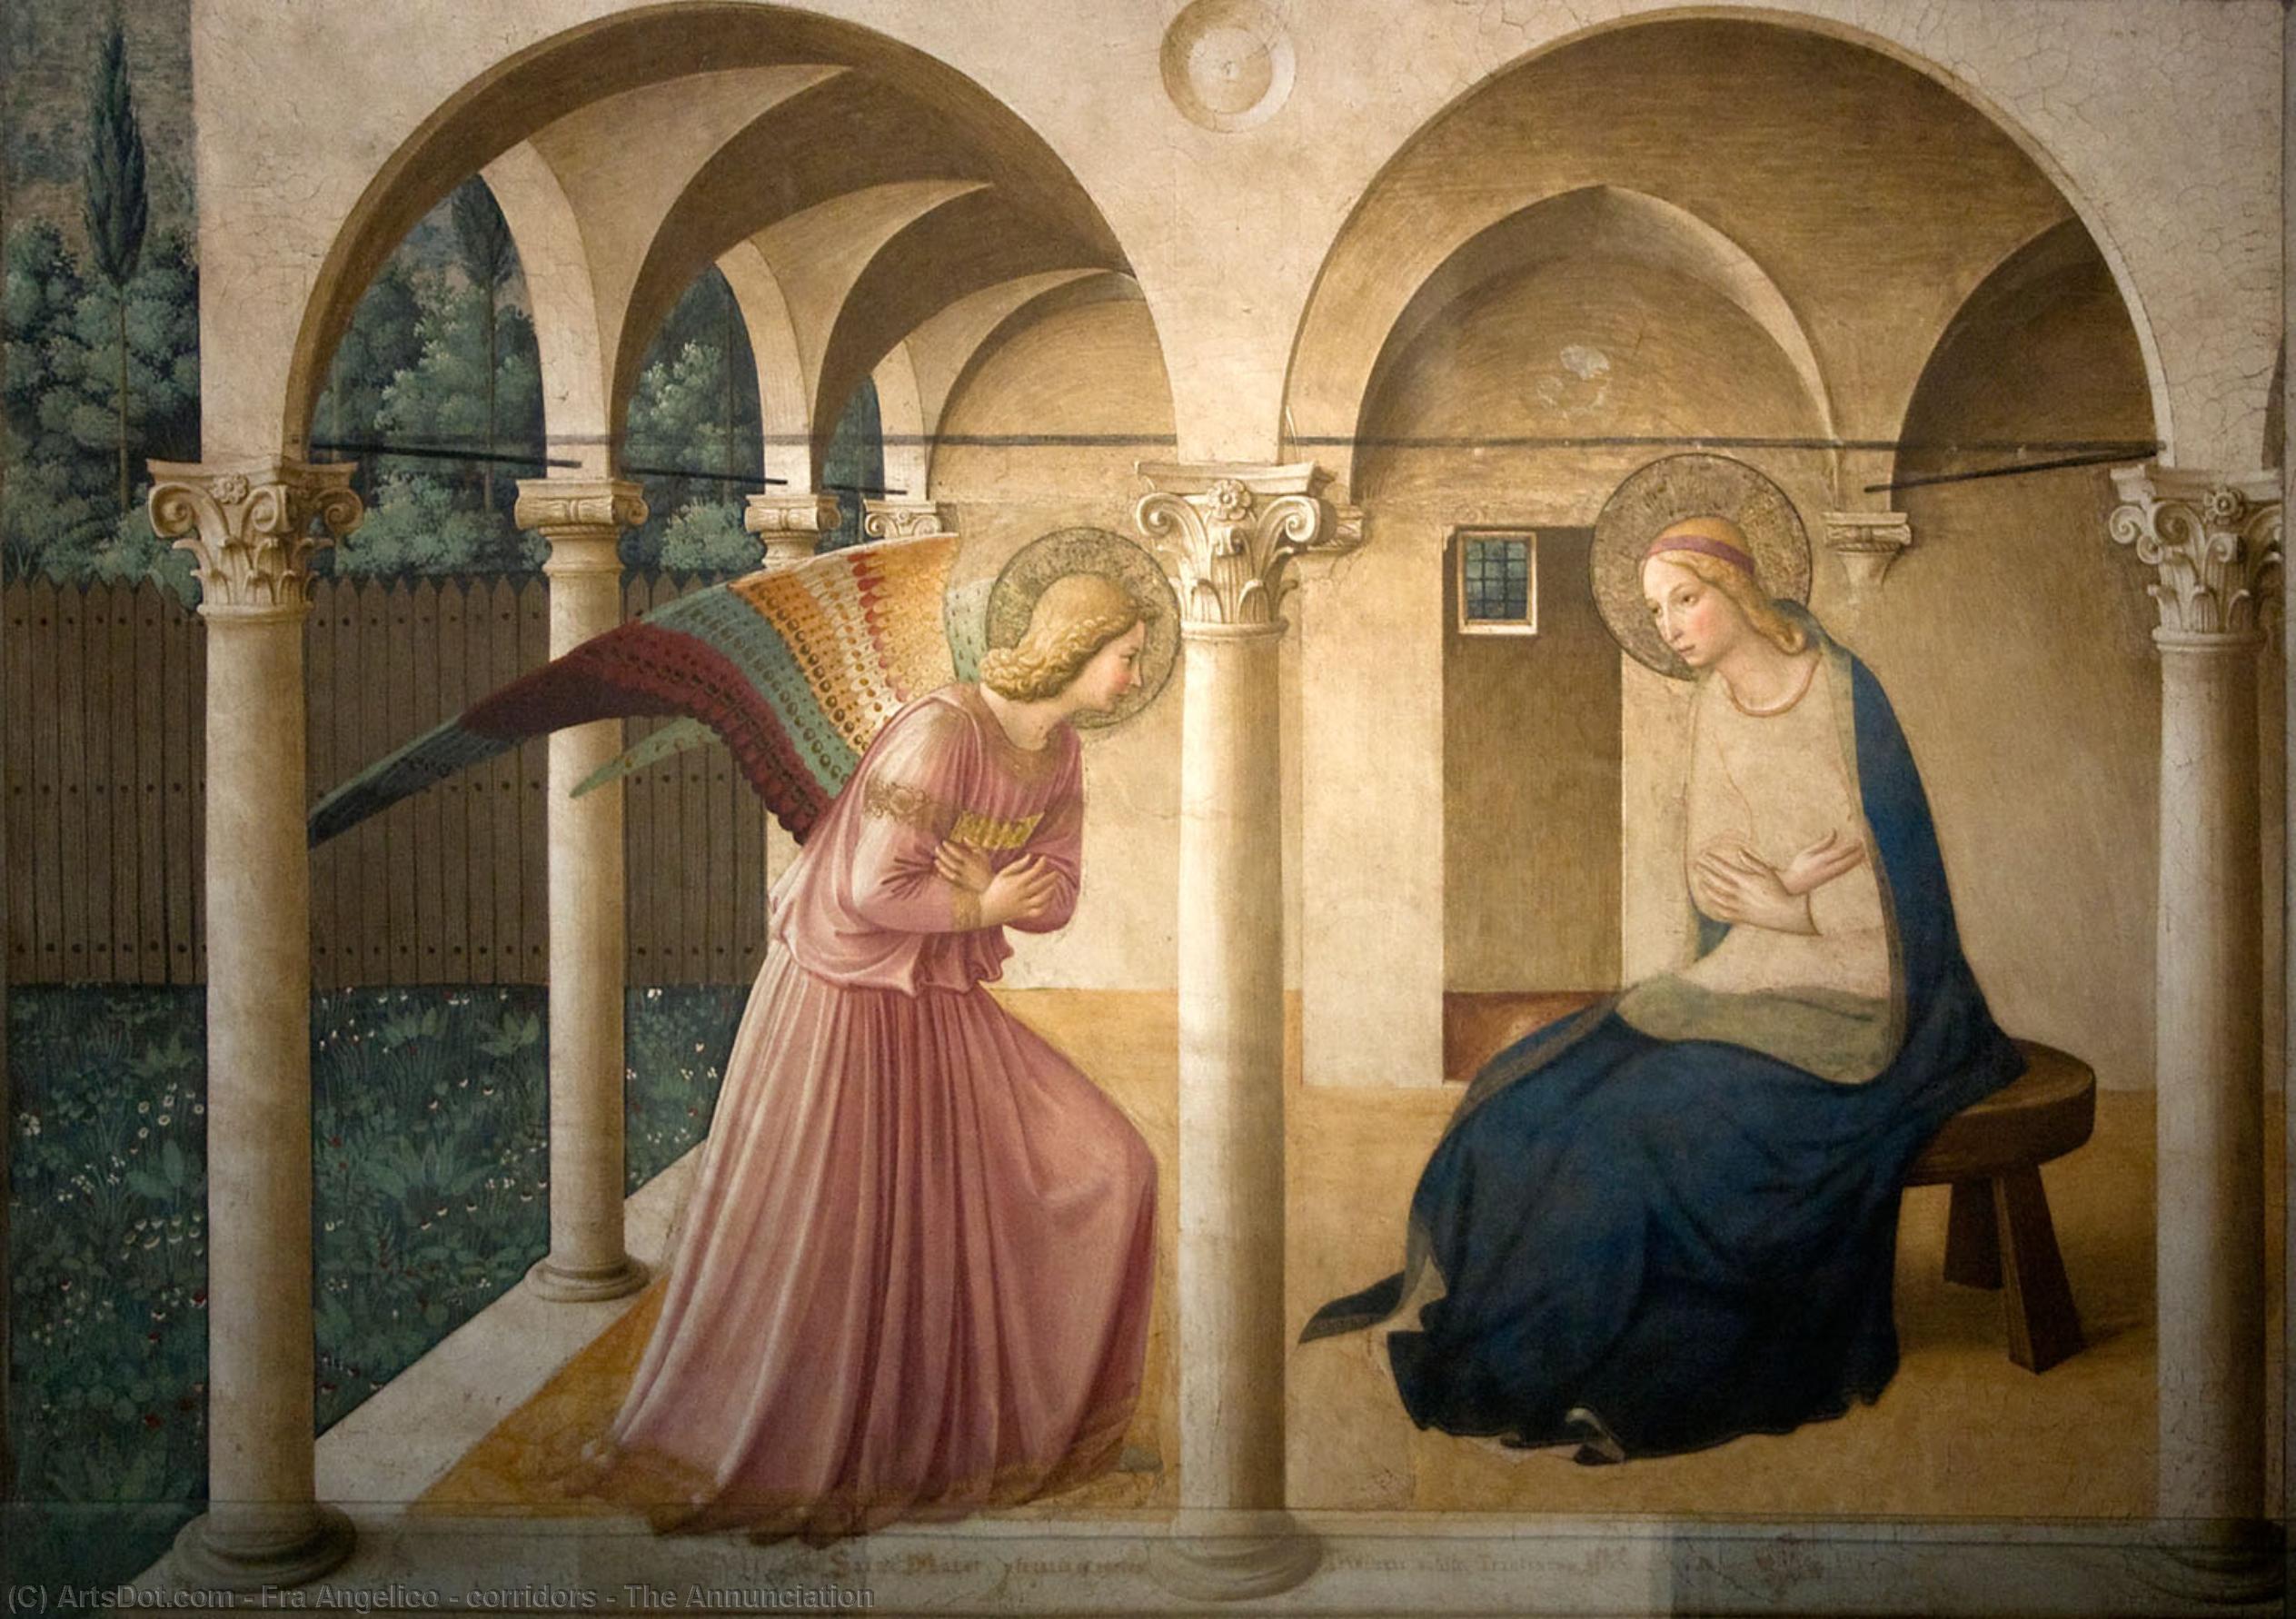 WikiOO.org - 백과 사전 - 회화, 삽화 Fra Angelico - corridors - The Annunciation